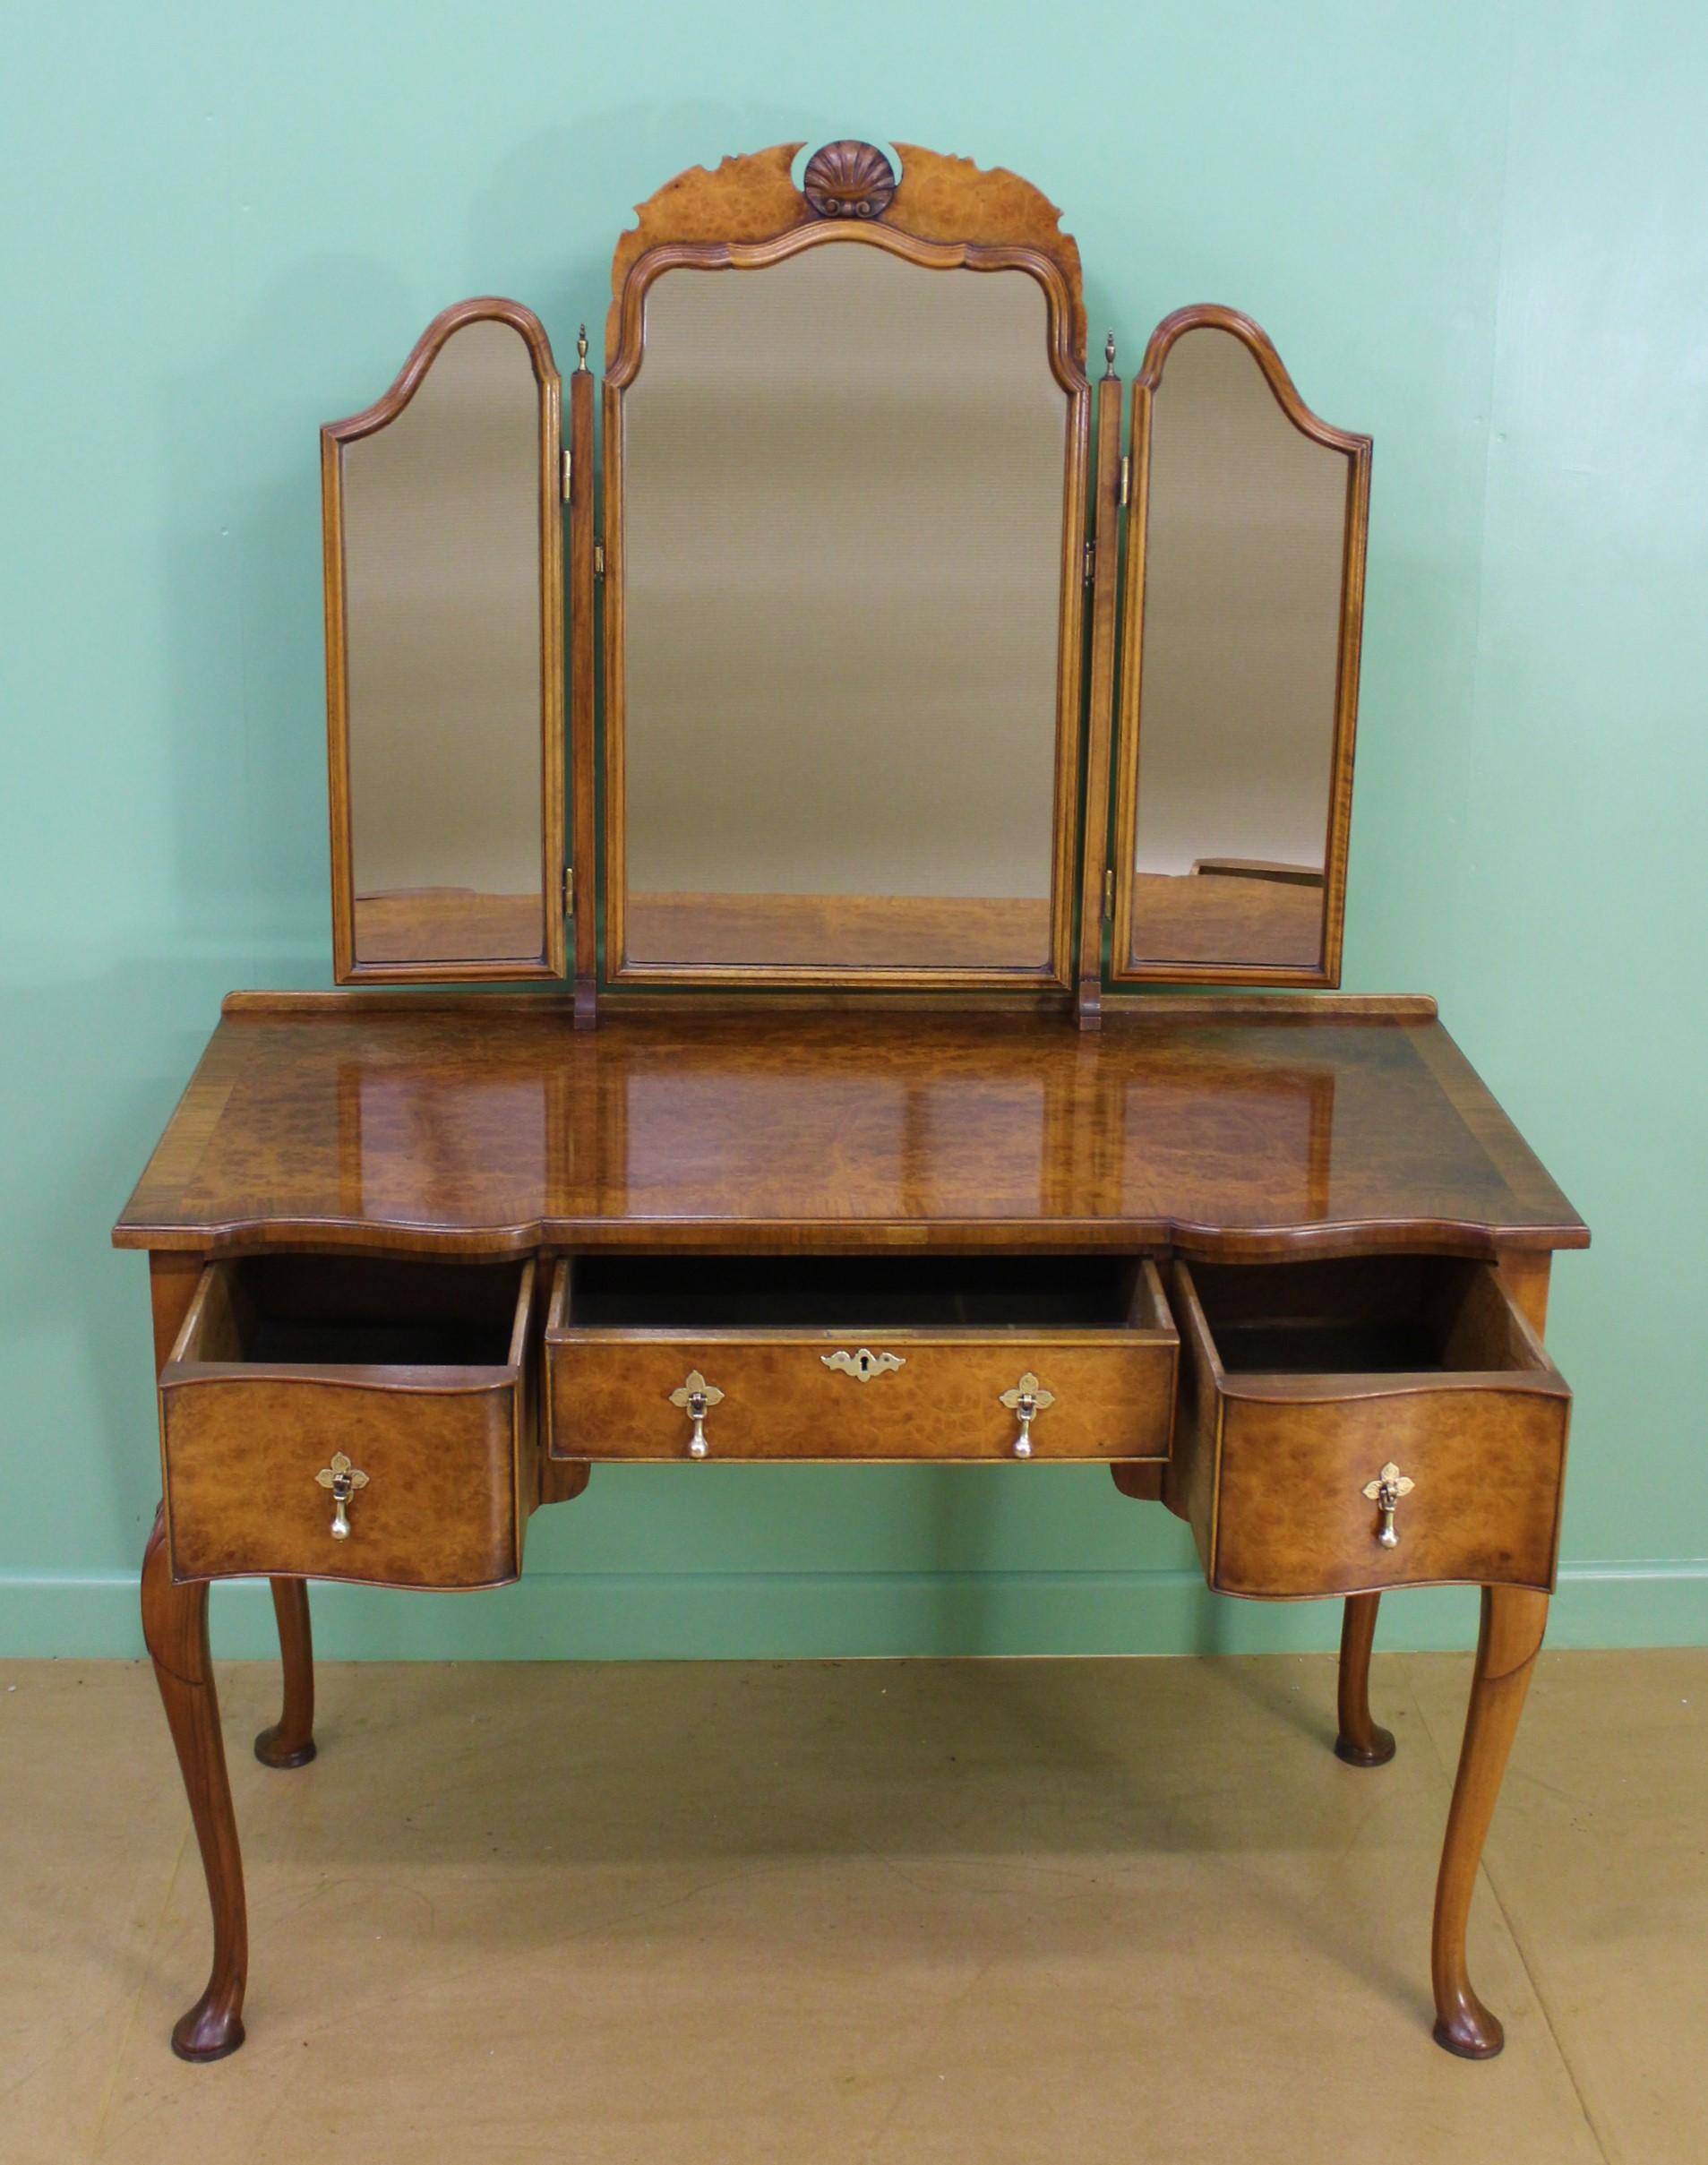 20th Century English Queen Anne Style Burr Walnut Dressing Table